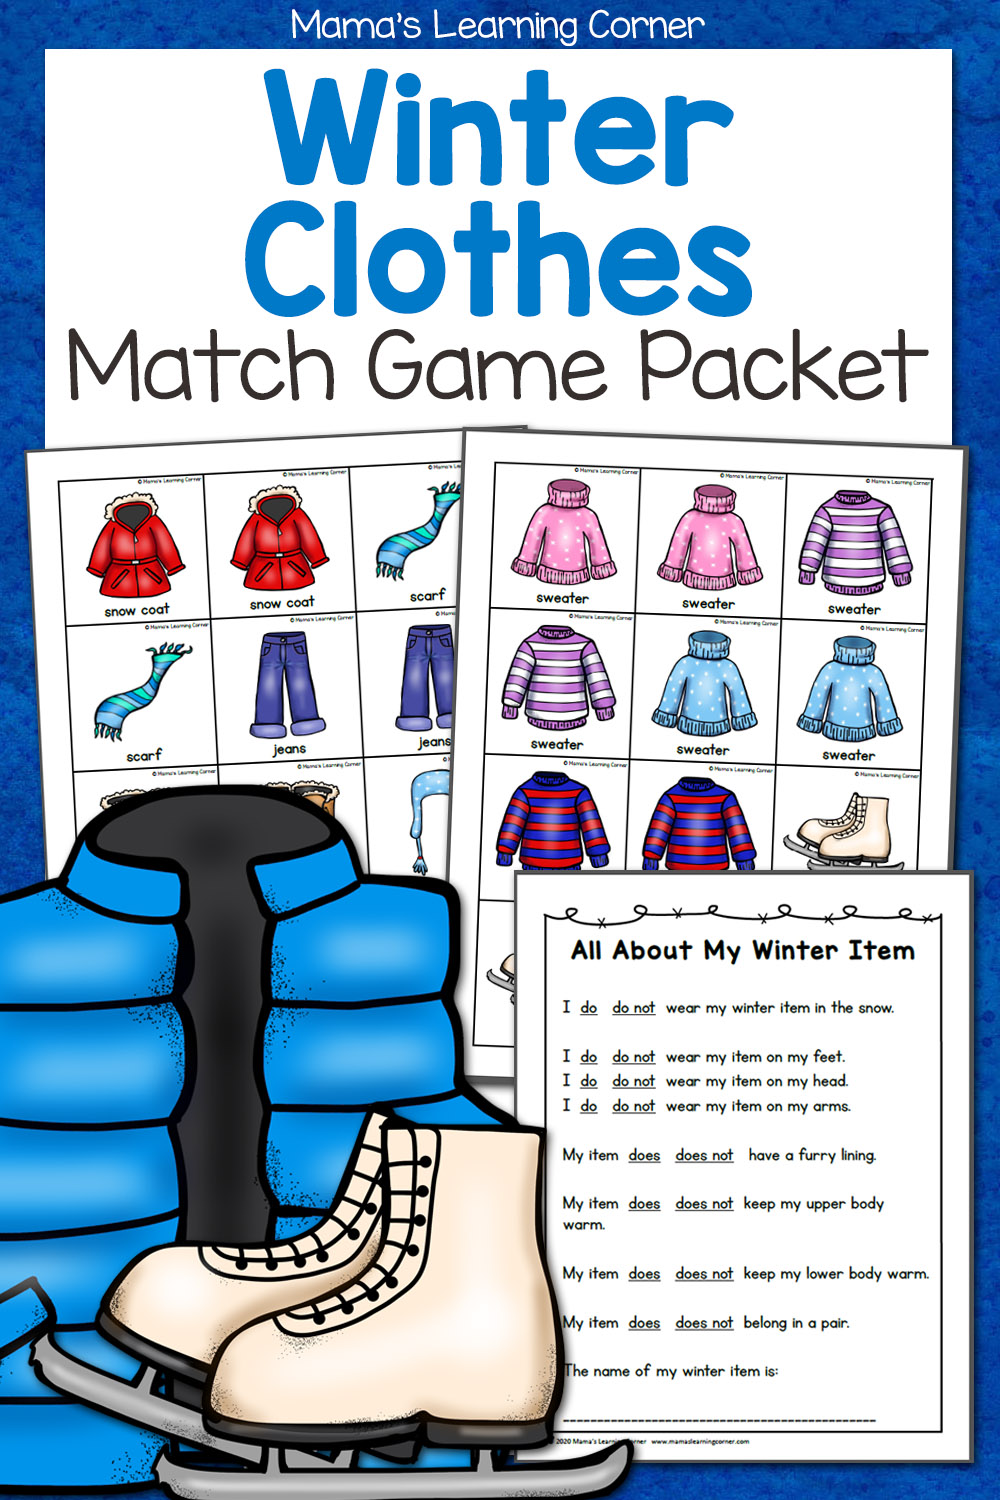 Winter Clothes Match Game Packet Mamas Learning Corner